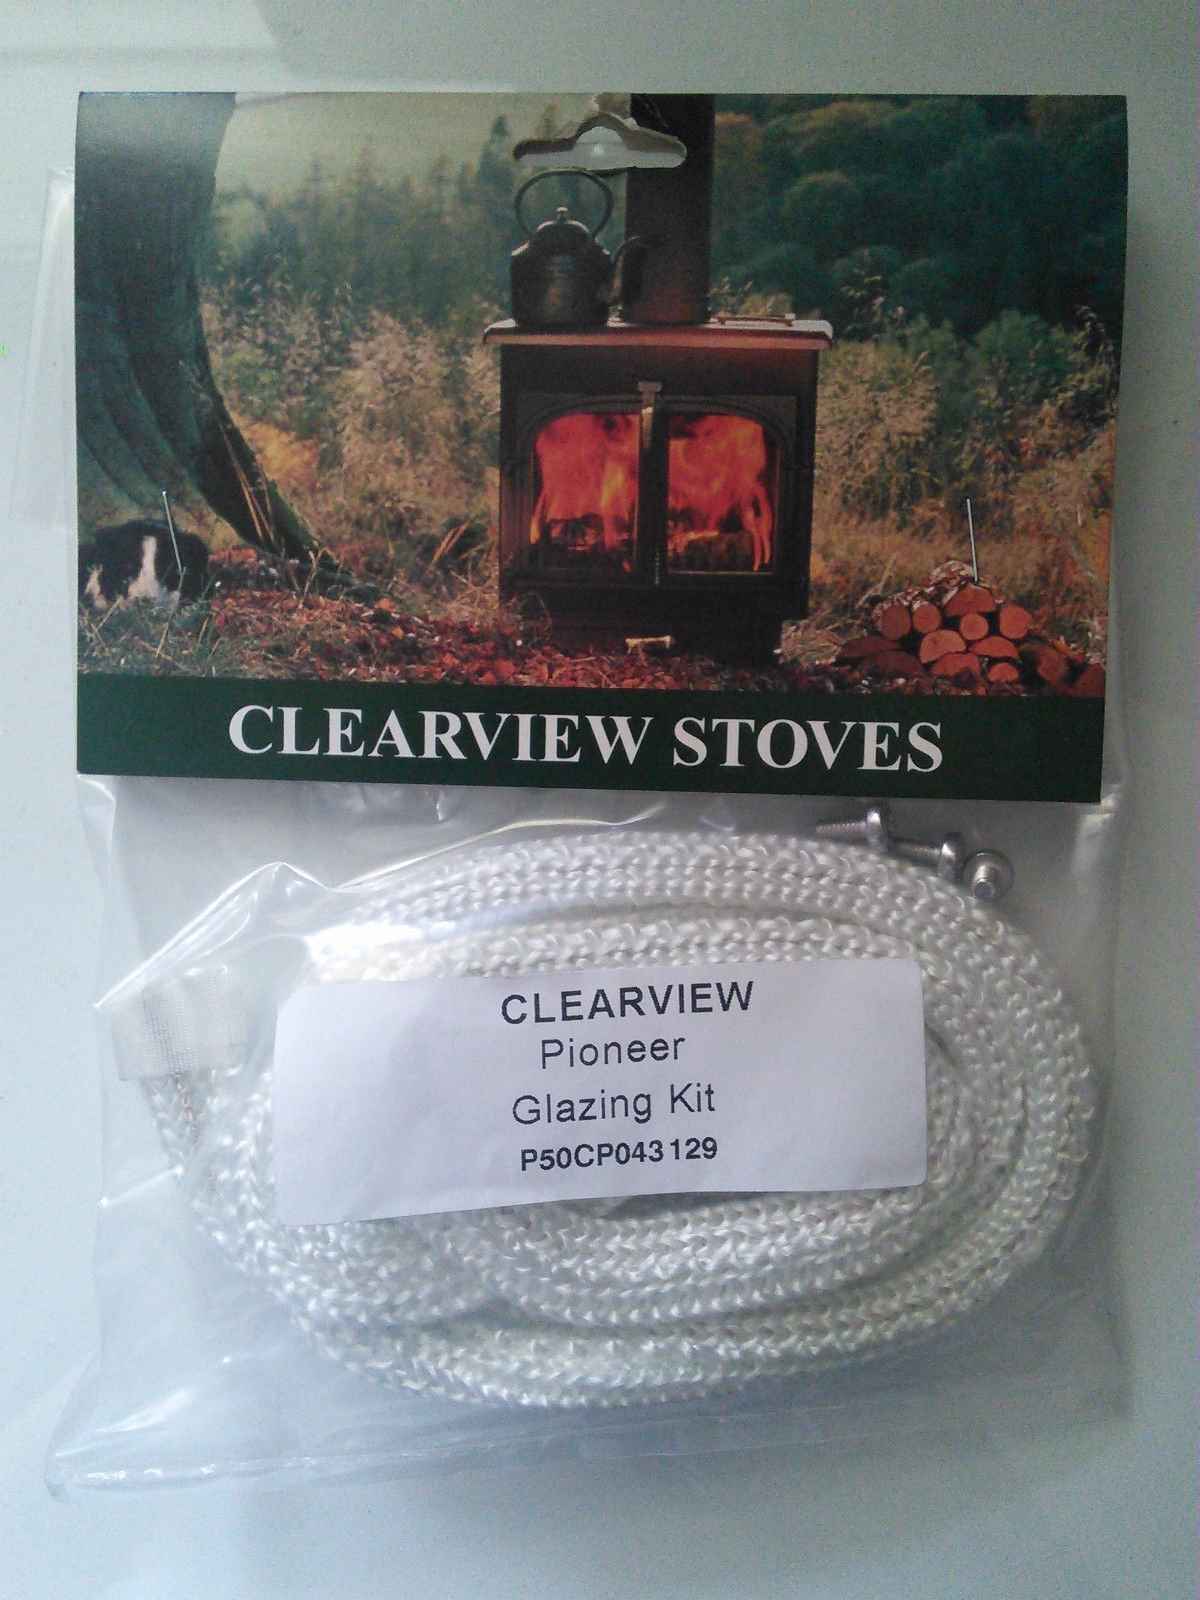 Clearview Stoves Glazing Kit